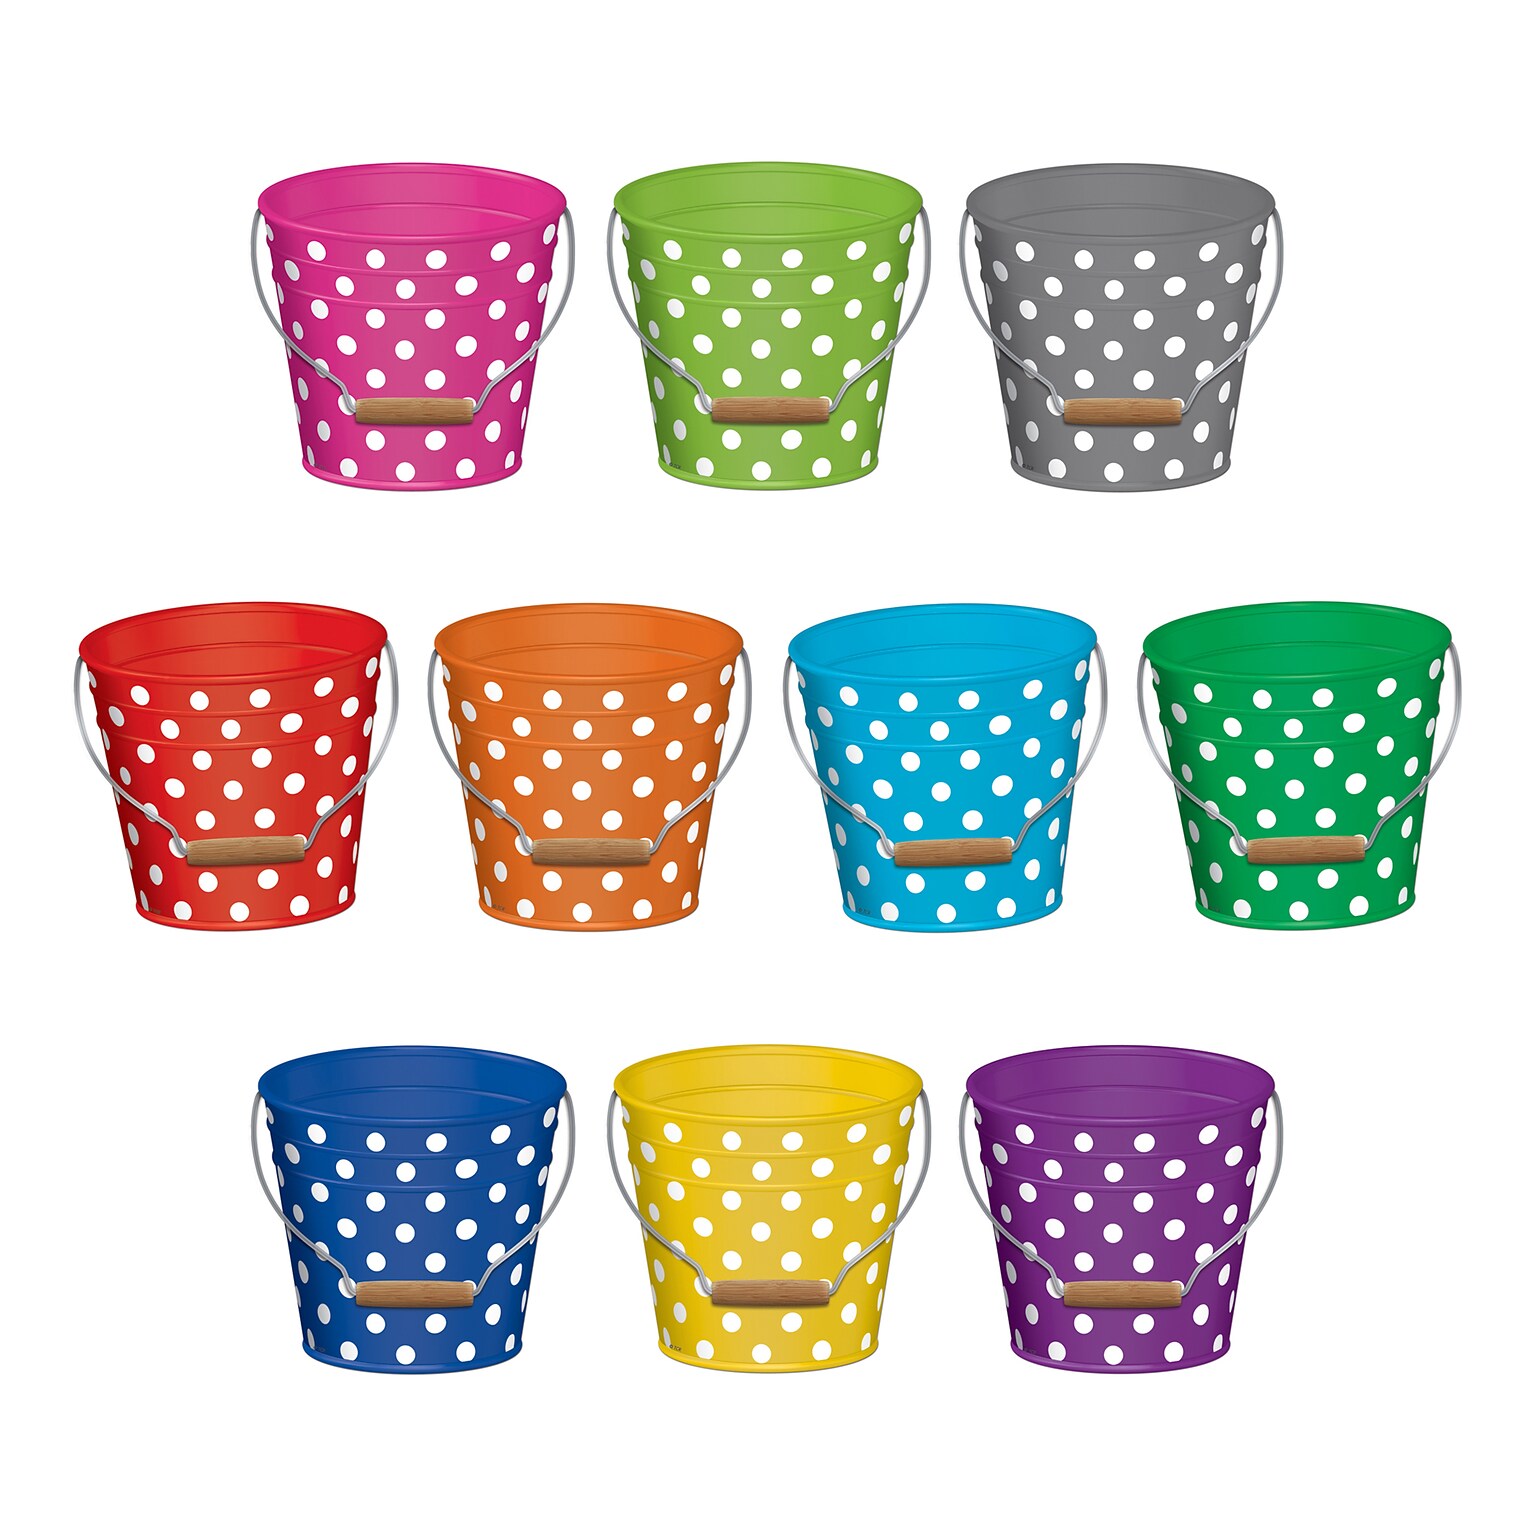 Teacher Created Resources 6 Polka Dots Buckets, Assorted Colors (TCR5631)